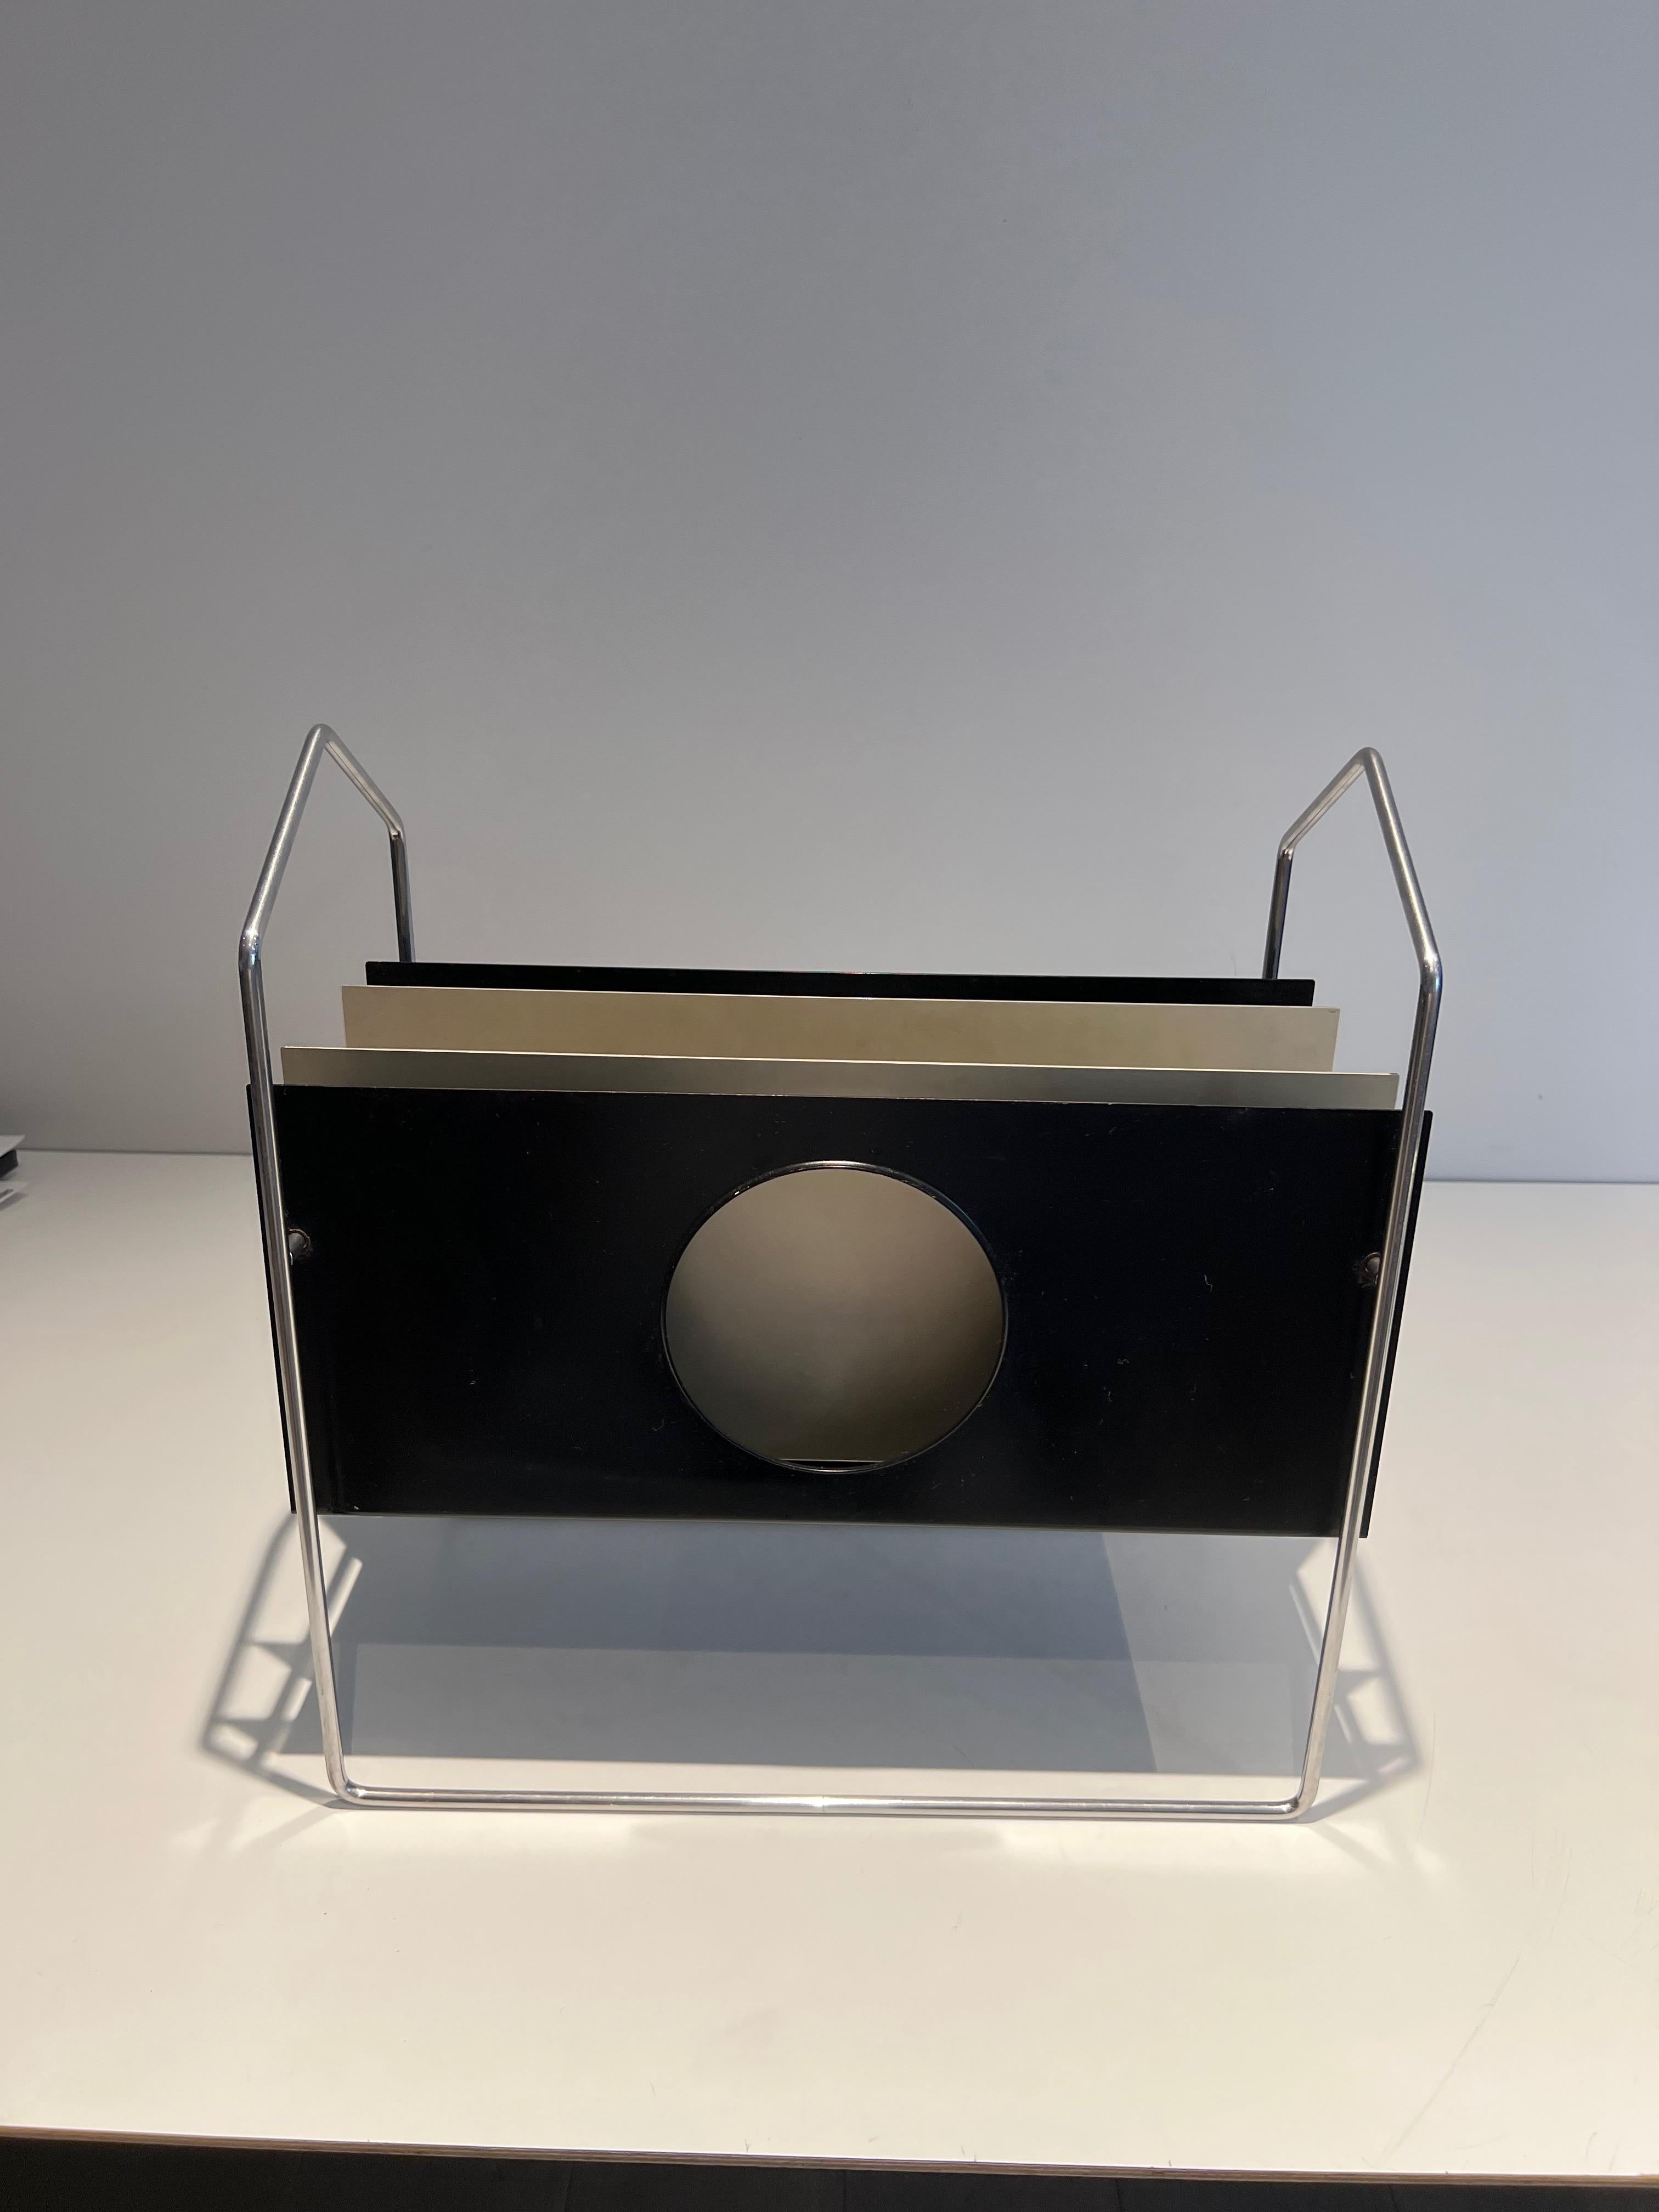 This design magazine rack is made of chrome and black and white lacquered metal. The magazine compartments are sliding. This is a French work. Circa 1950